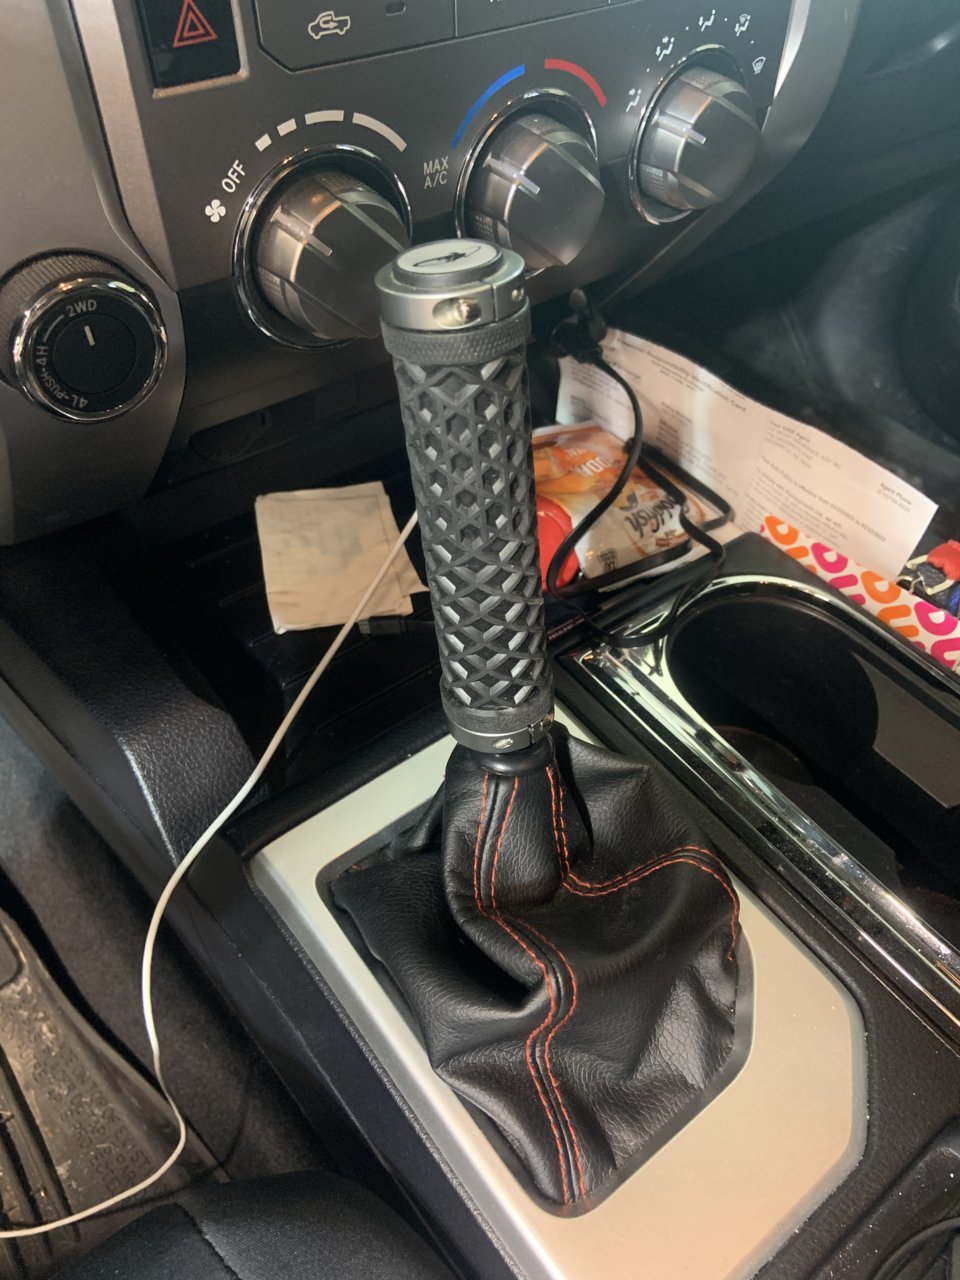 Show me your shift knobs